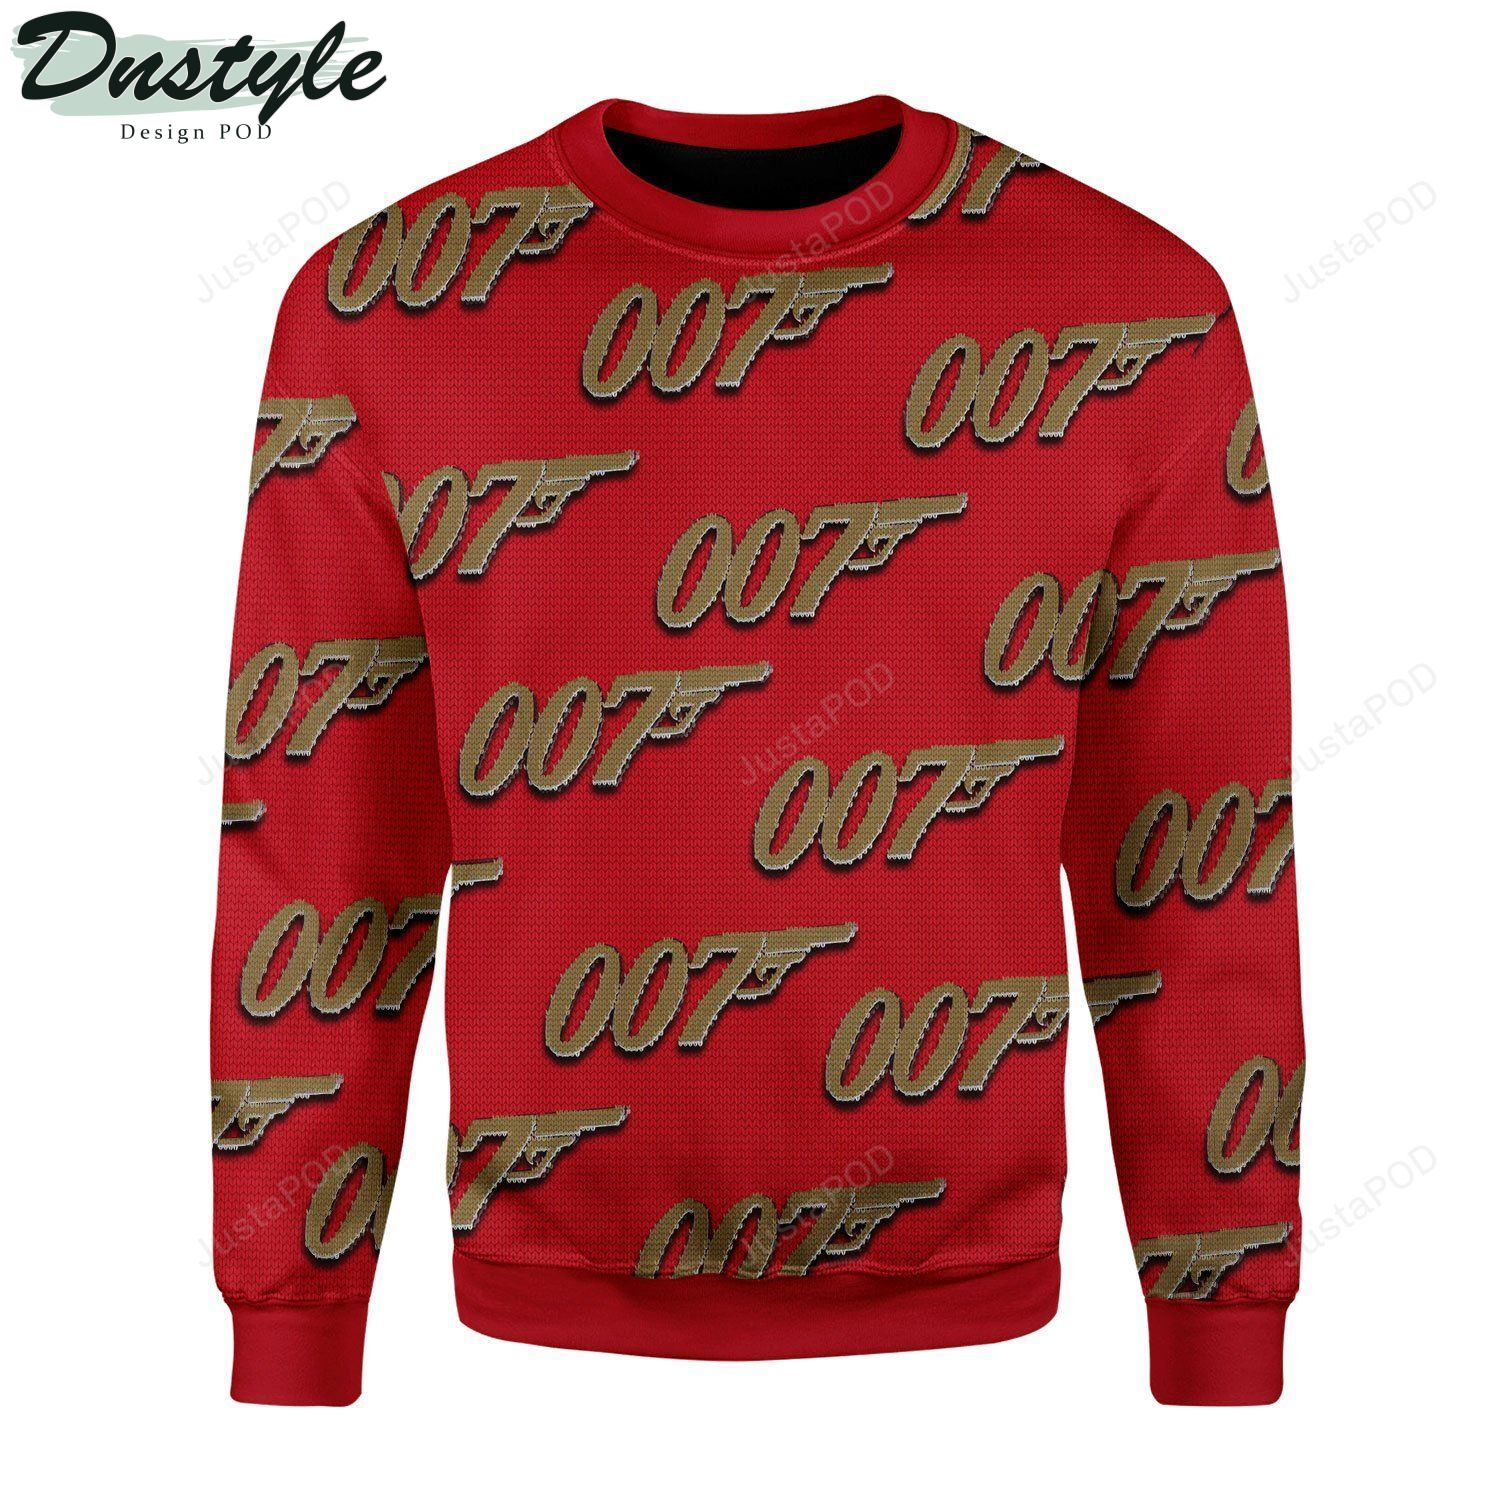 007 Detective Red Ugly Christmas Sweater